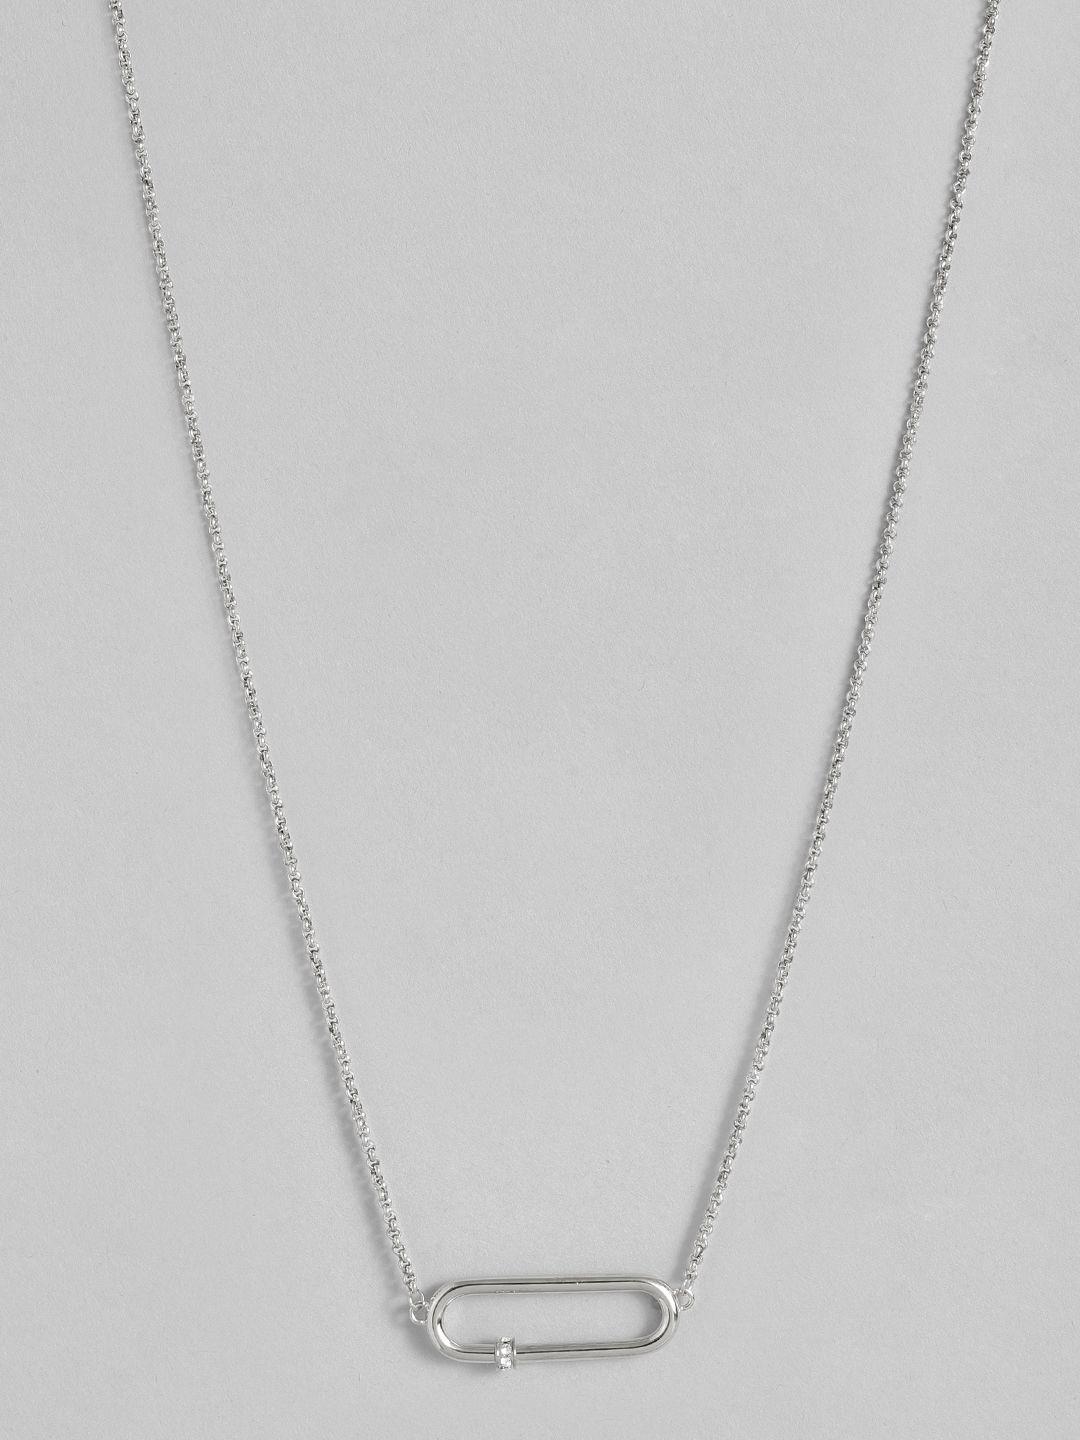 calvin klein elongated oval-shaped stainless steel necklace